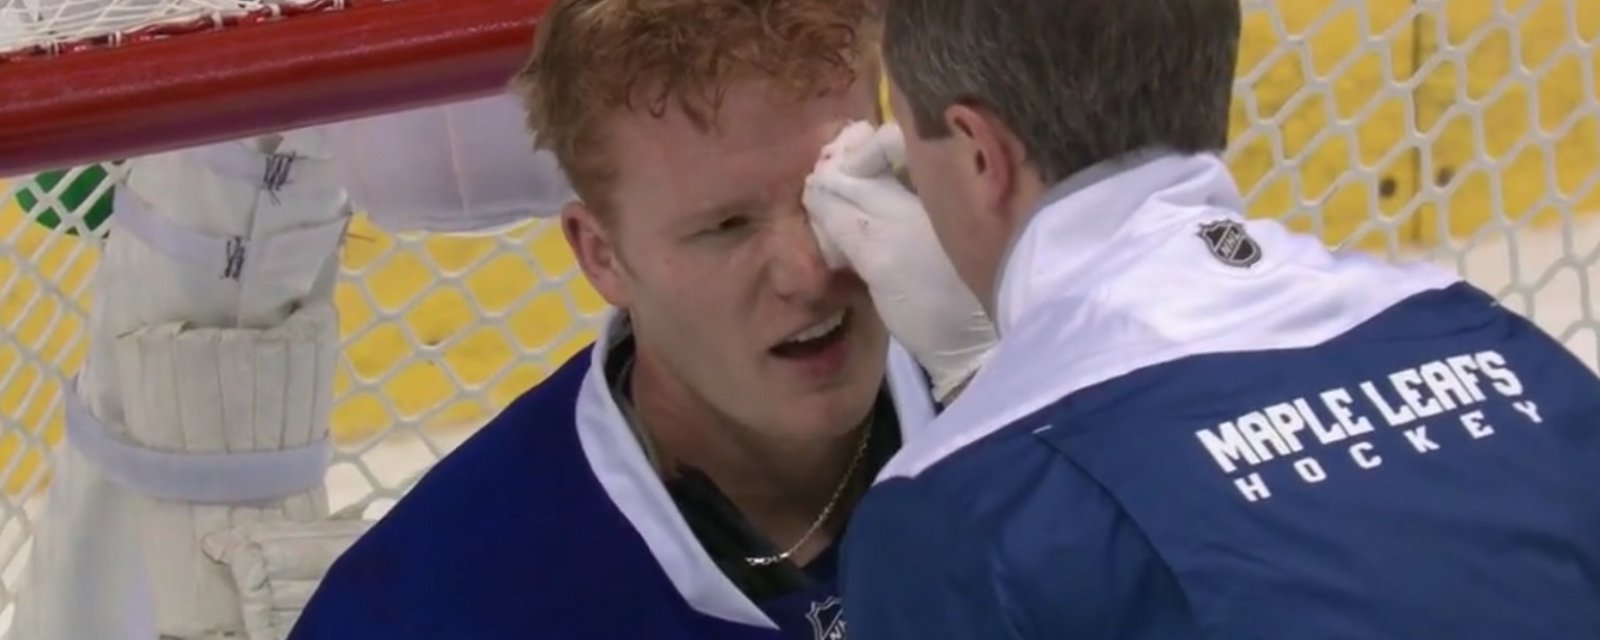 Leafs goalie Andersen split open by a high stick through his mask!